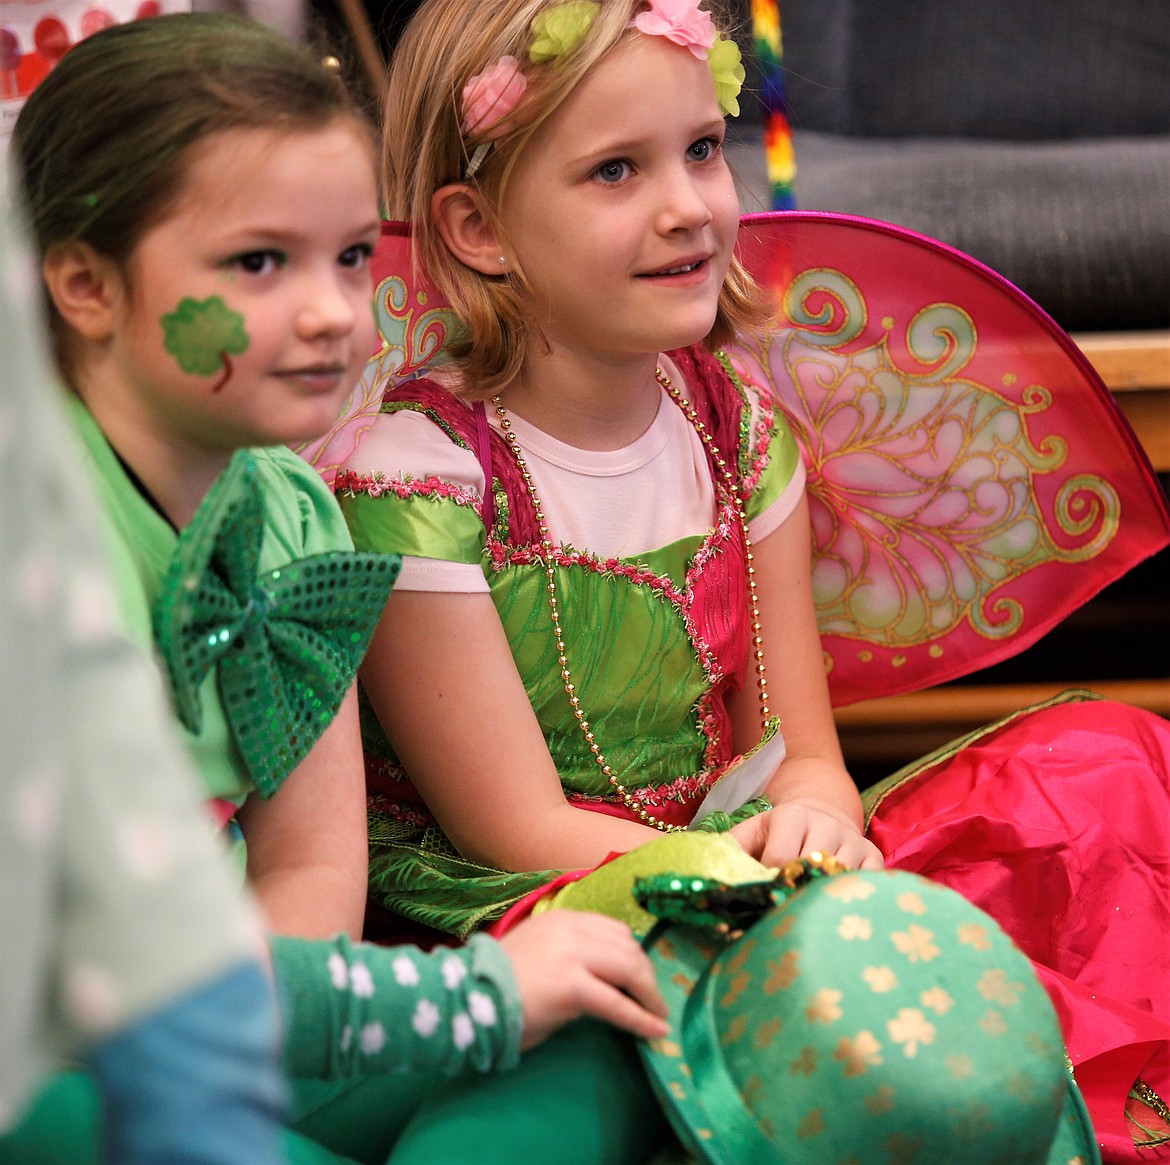 Lola Rayner and Lily Rush join classmates at Kinder Magic in celebrating St. Patrick's Day on Thursday.